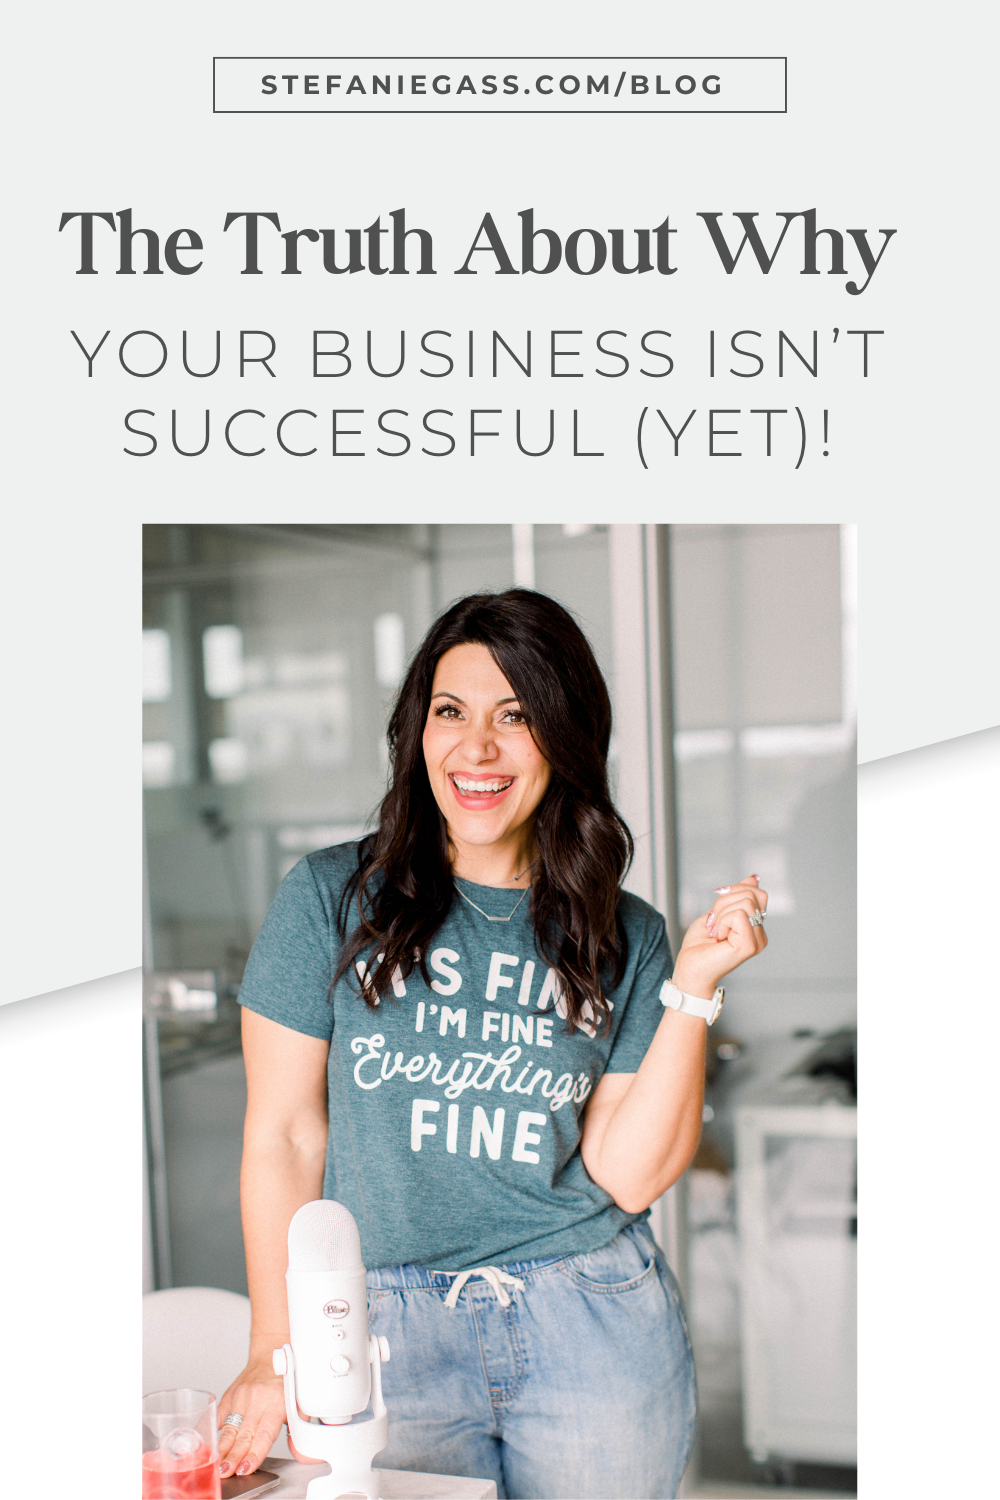 Text reads " The truth about why your business isn't successful (yet)!. Image is a smiling woman with long dark hair holding a podcast microphone.